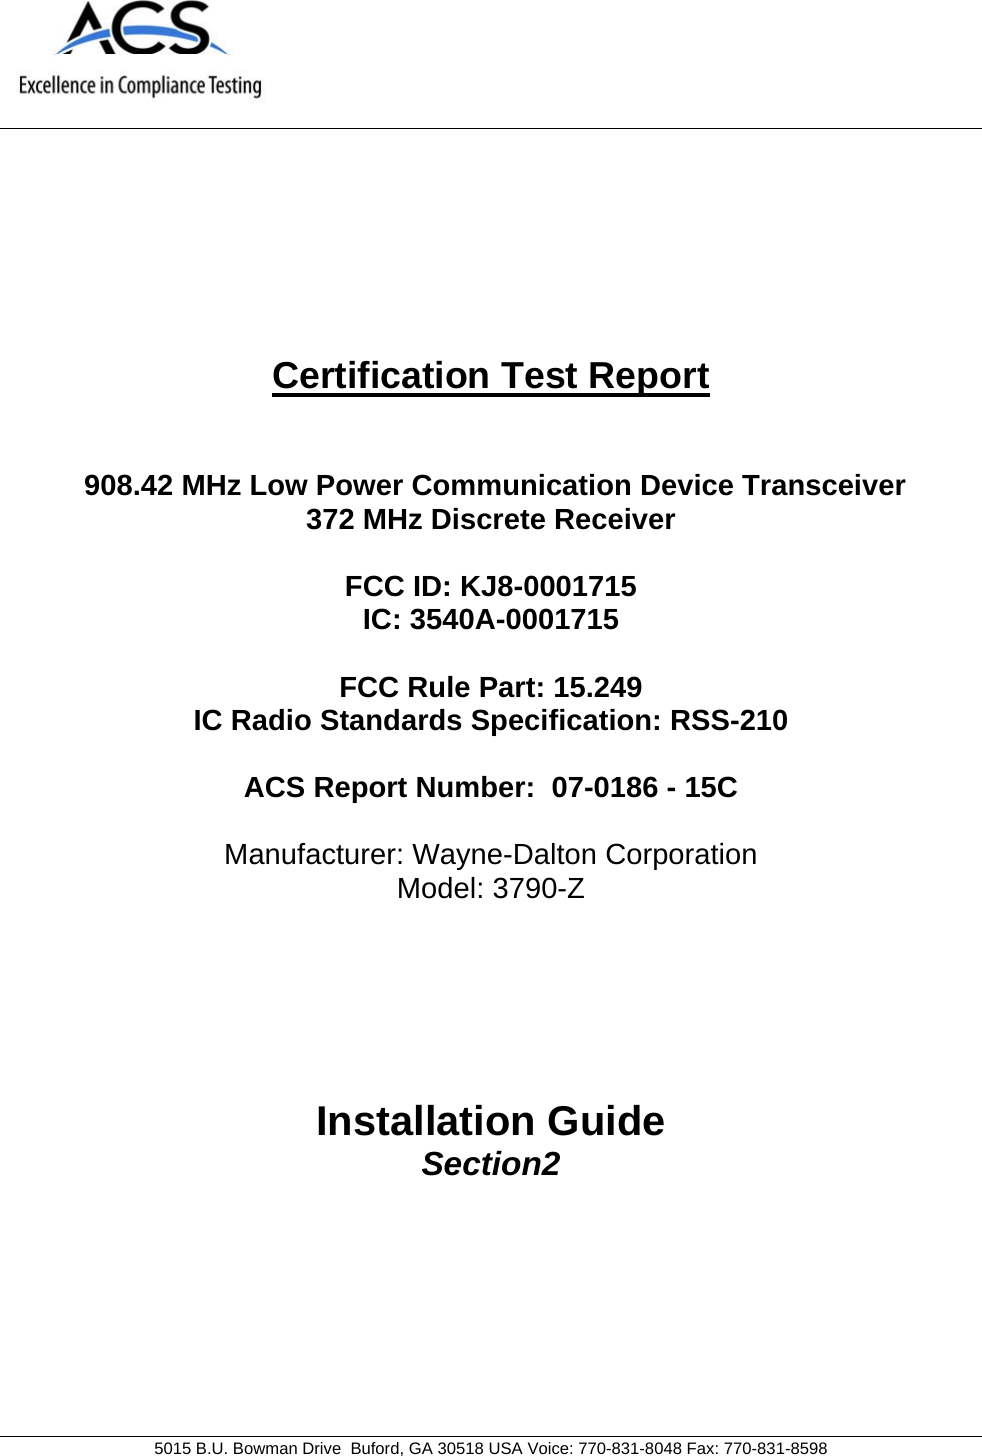     5015 B.U. Bowman Drive  Buford, GA 30518 USA Voice: 770-831-8048 Fax: 770-831-8598   Certification Test Report    908.42 MHz Low Power Communication Device Transceiver 372 MHz Discrete Receiver  FCC ID: KJ8-0001715  IC: 3540A-0001715  FCC Rule Part: 15.249 IC Radio Standards Specification: RSS-210  ACS Report Number:  07-0186 - 15C   Manufacturer: Wayne-Dalton Corporation Model: 3790-Z     Installation Guide Section2  